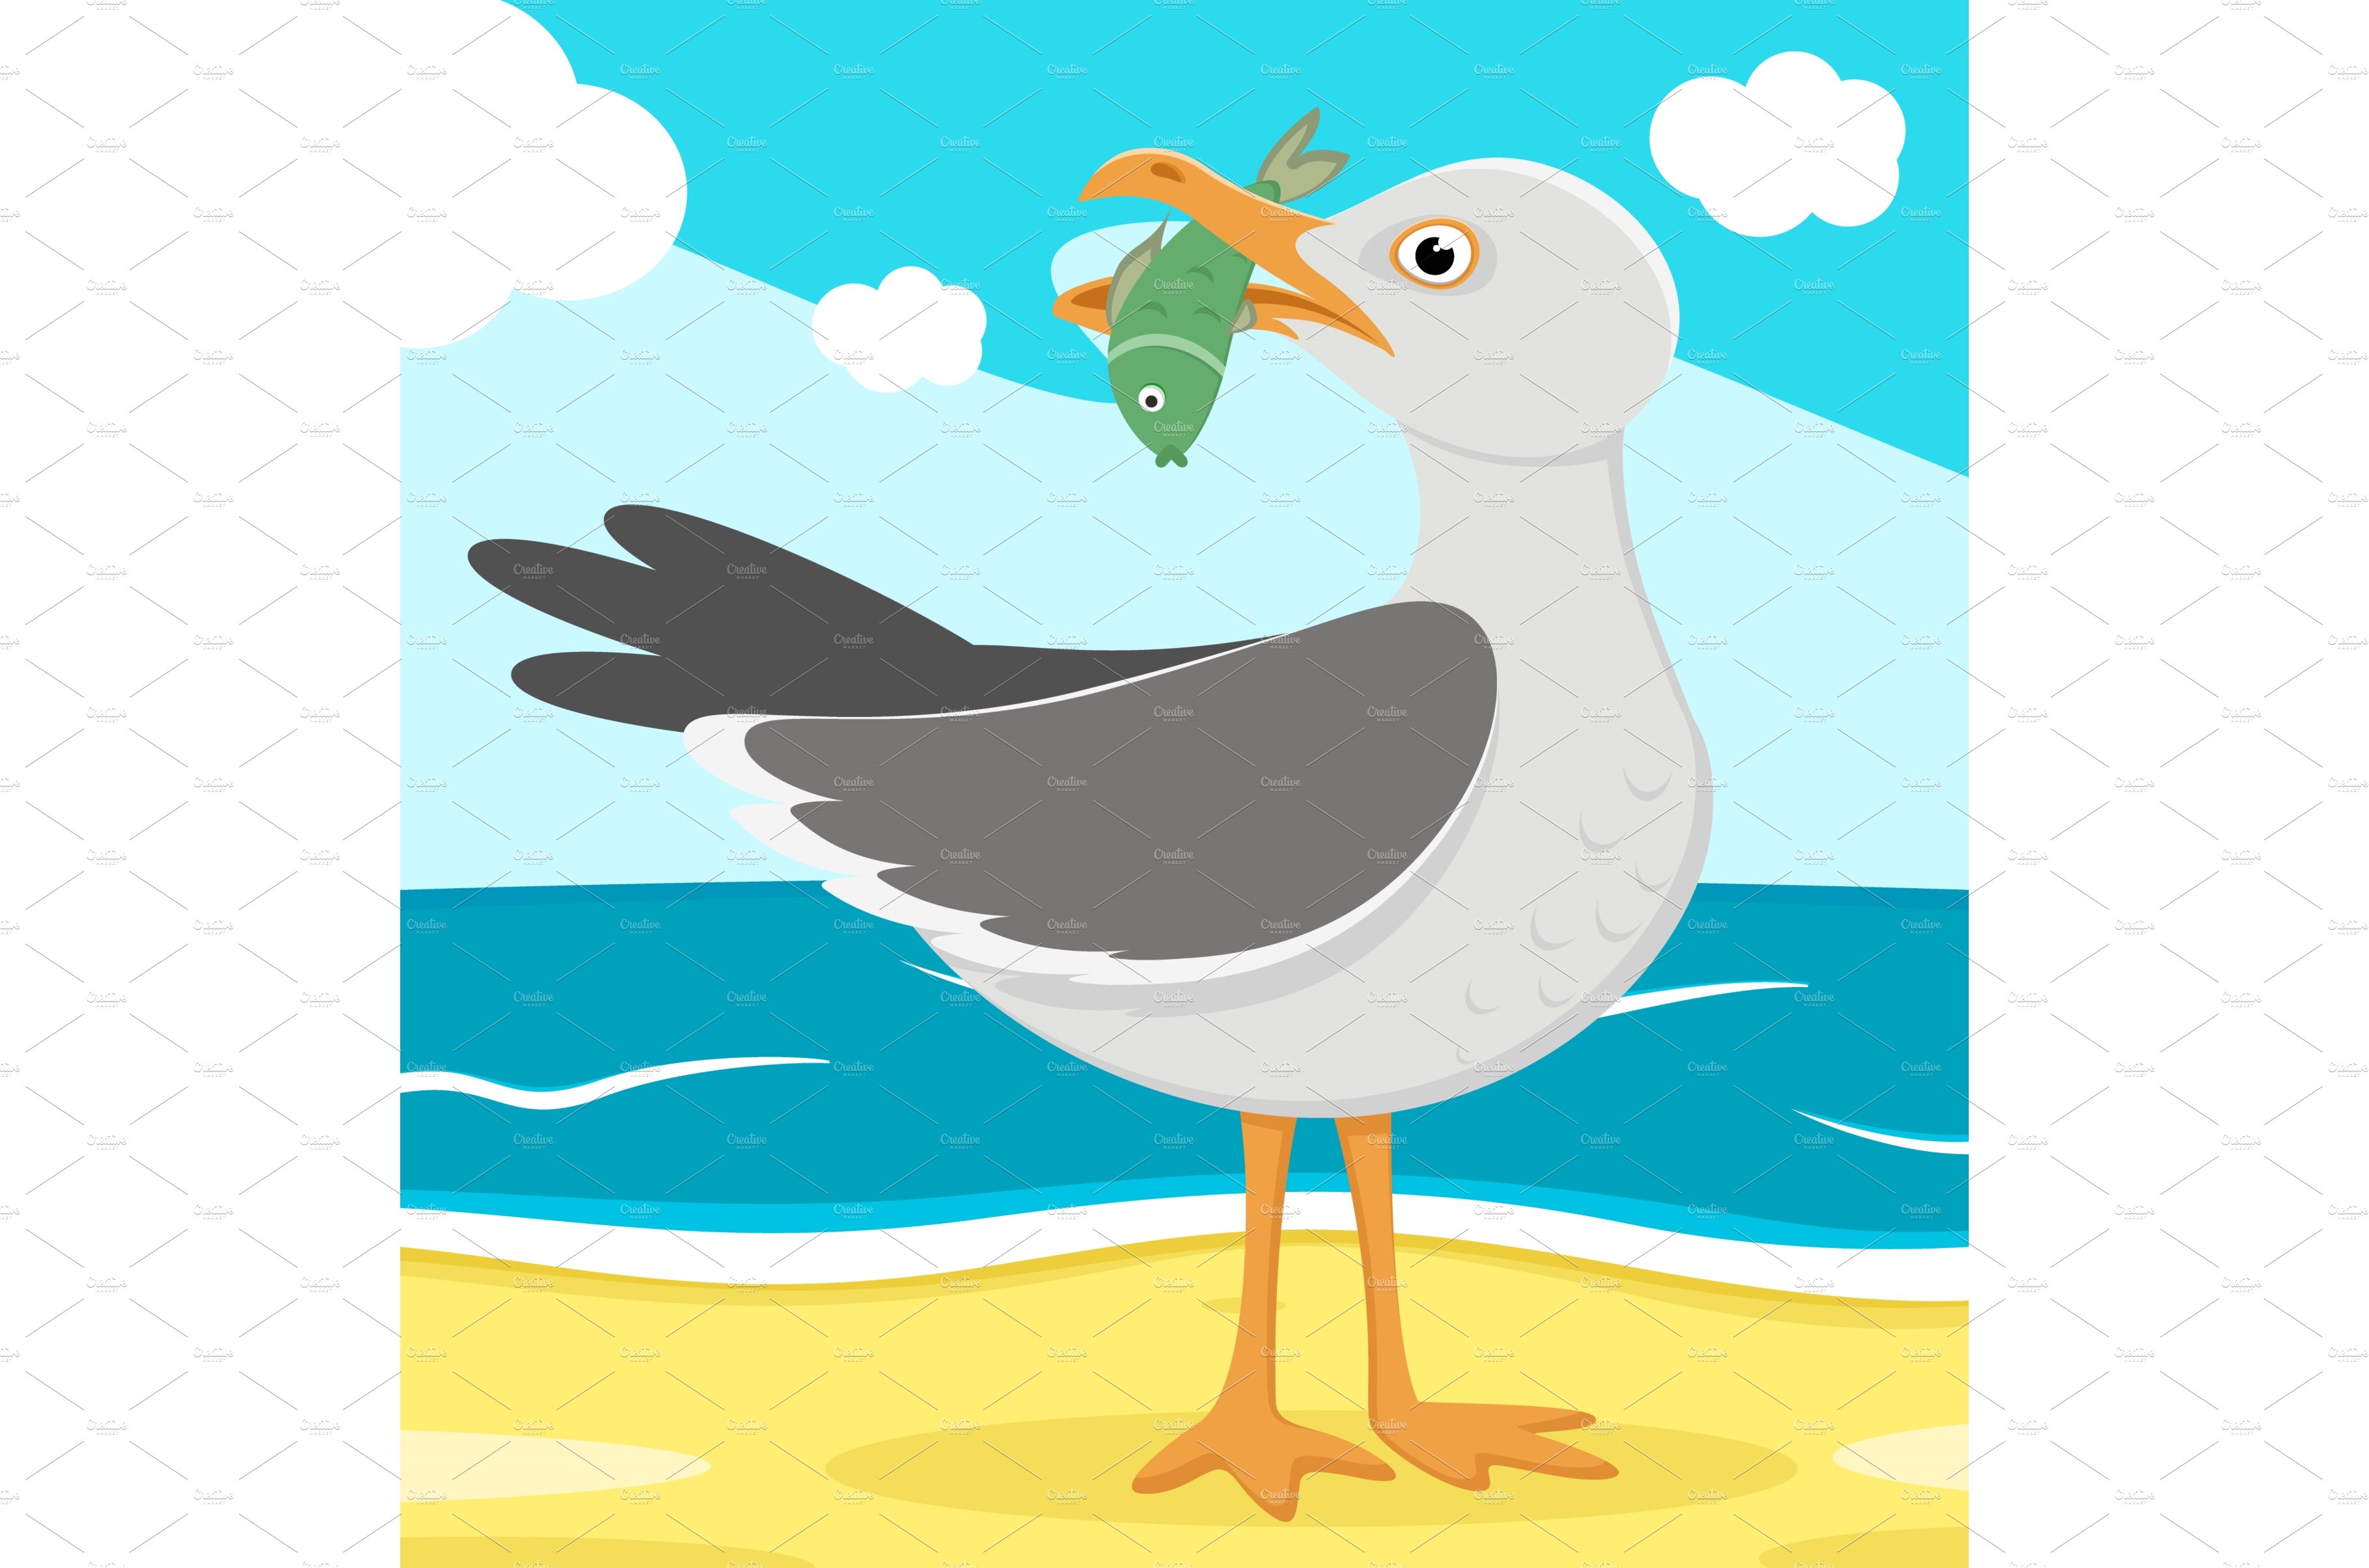 Seagull with fish in its beak stands cover image.